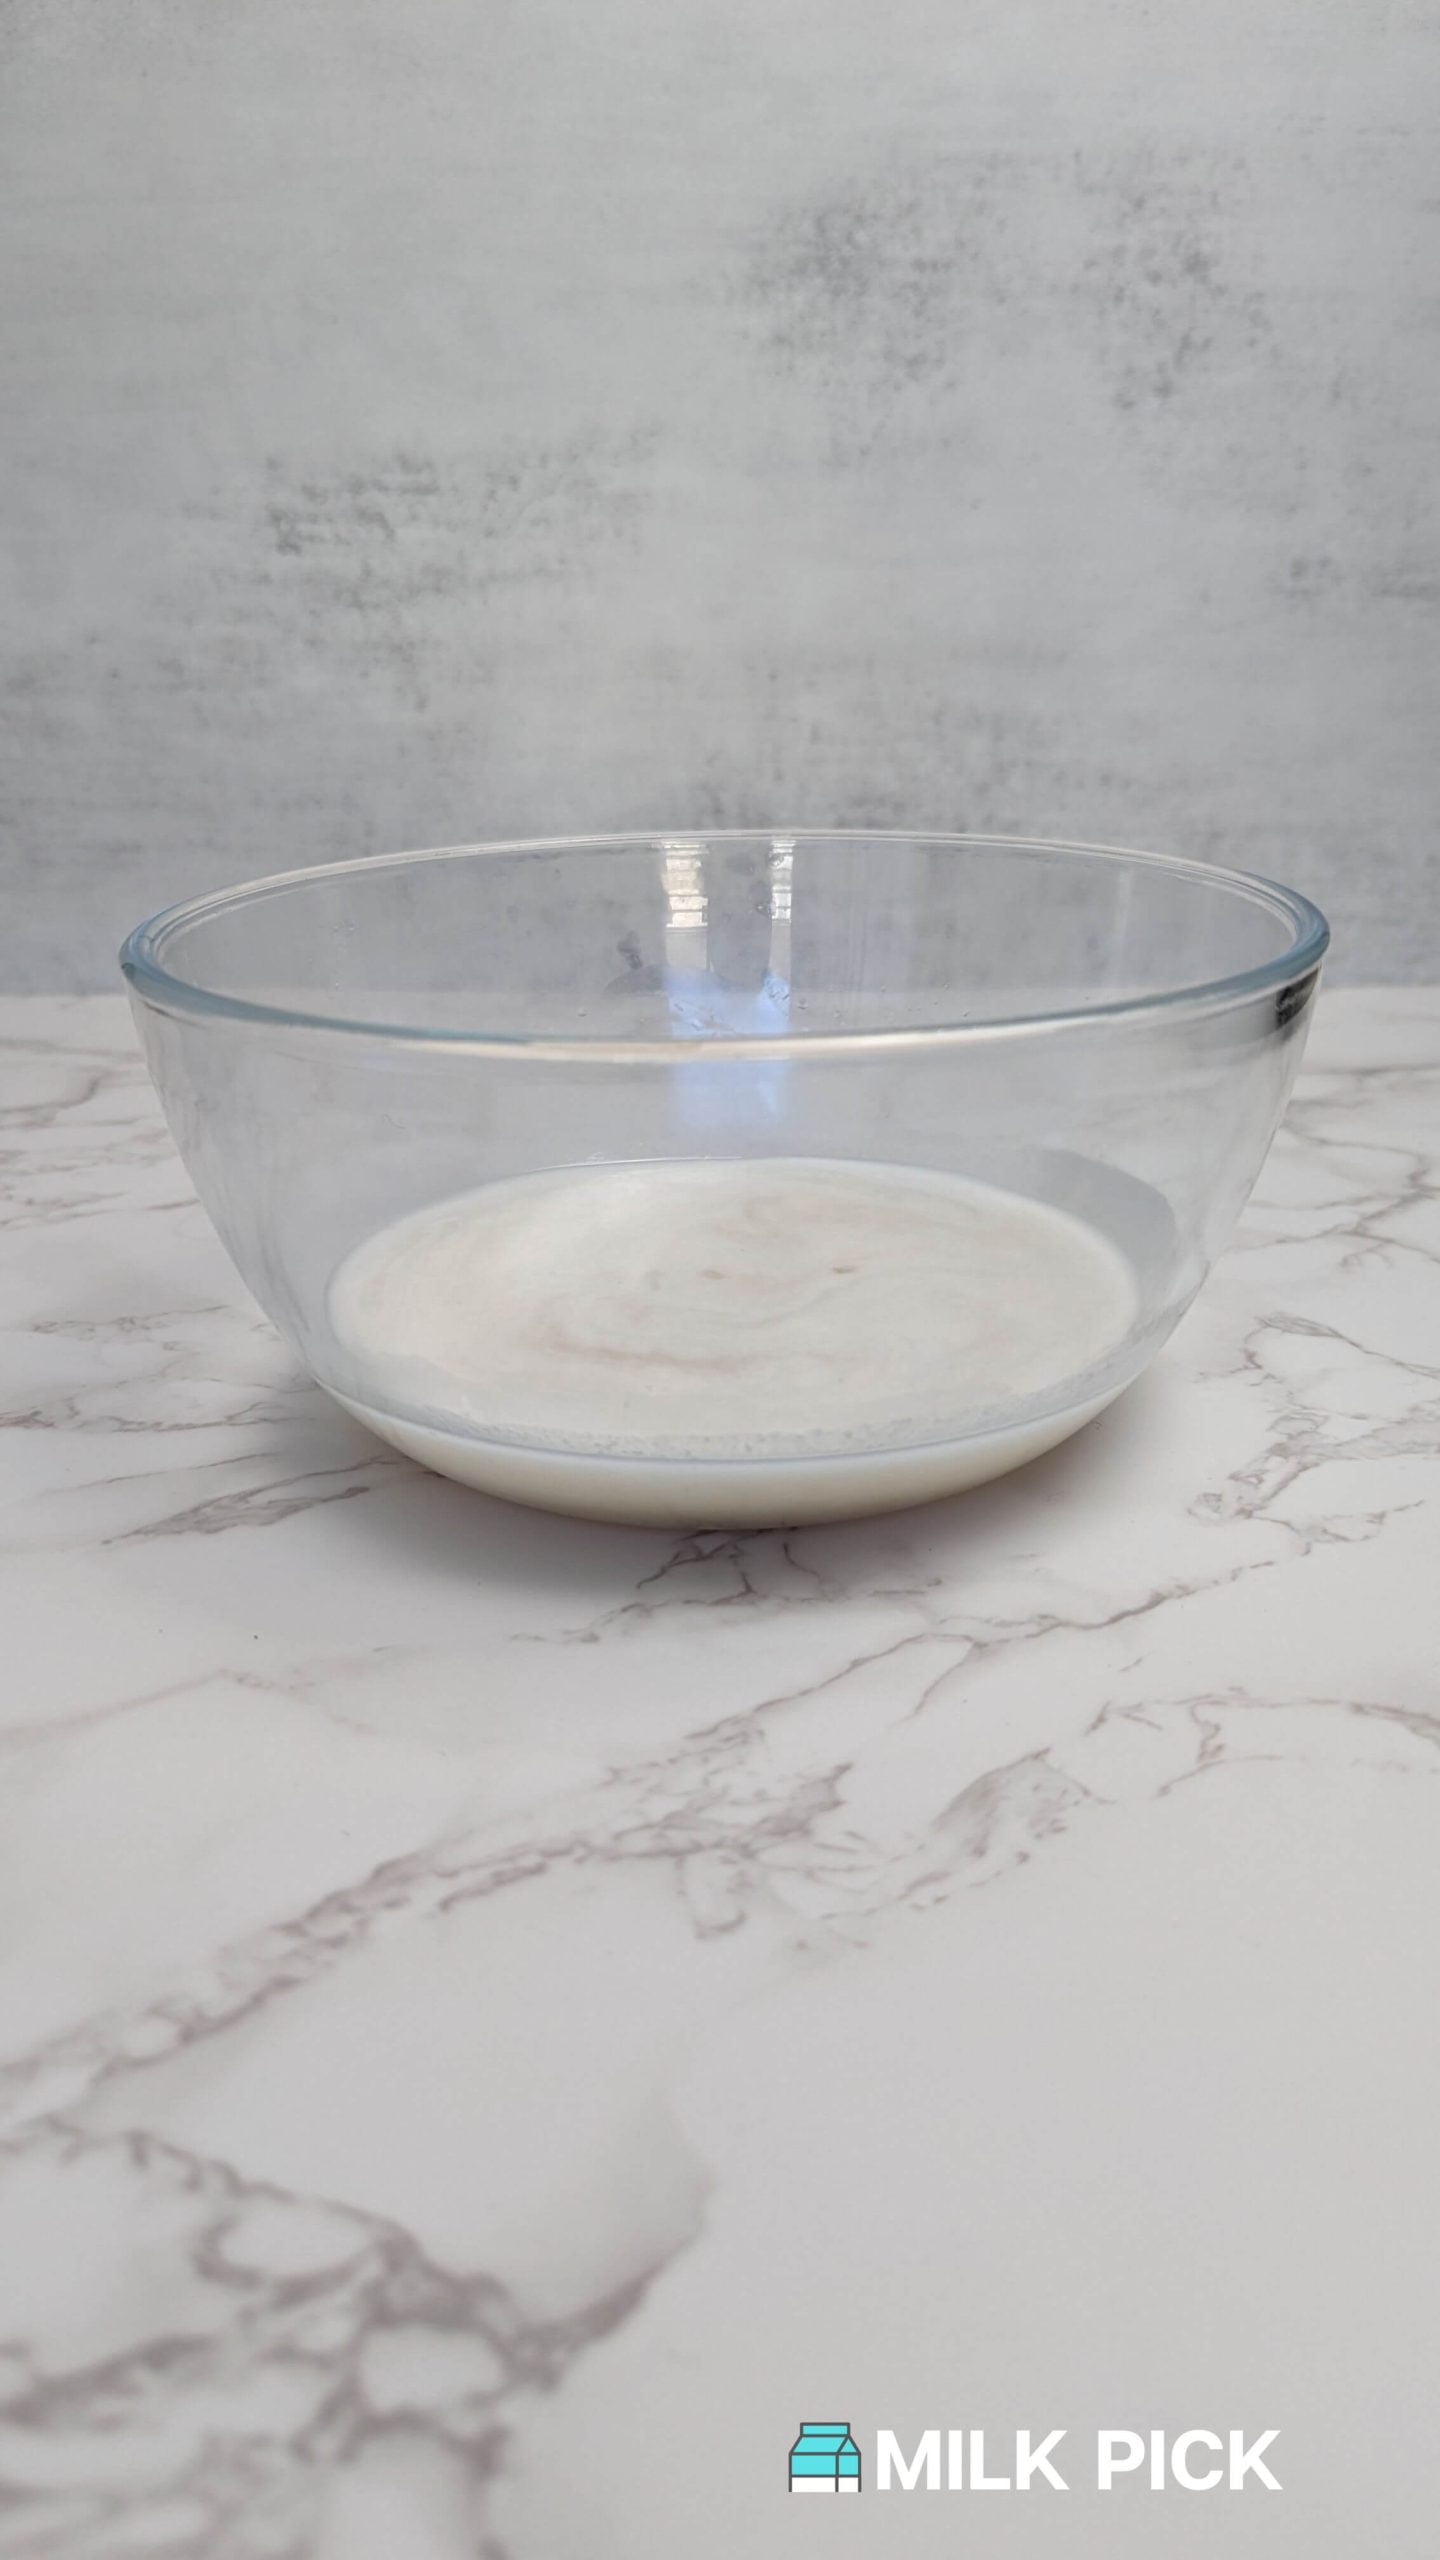 defrosted almond milk in glass bowl